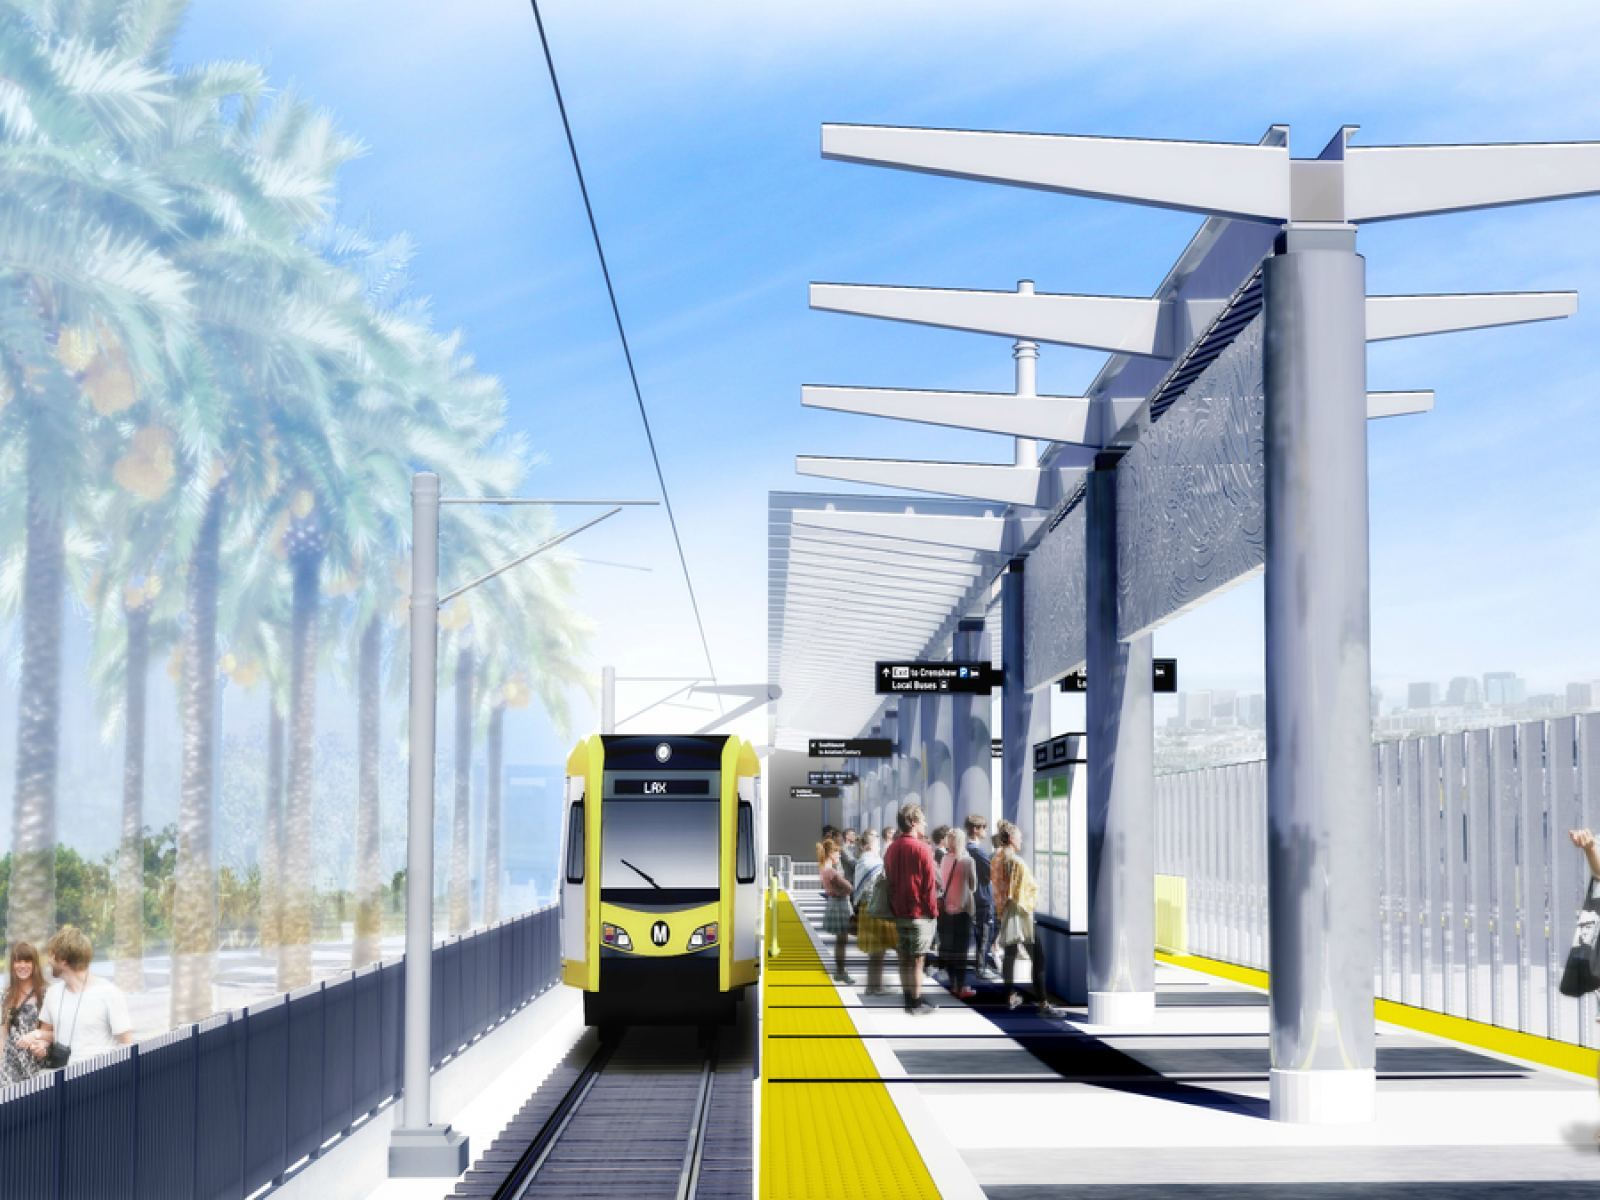 Get Connected With Metro S Crenshaw Lax Line In Discover